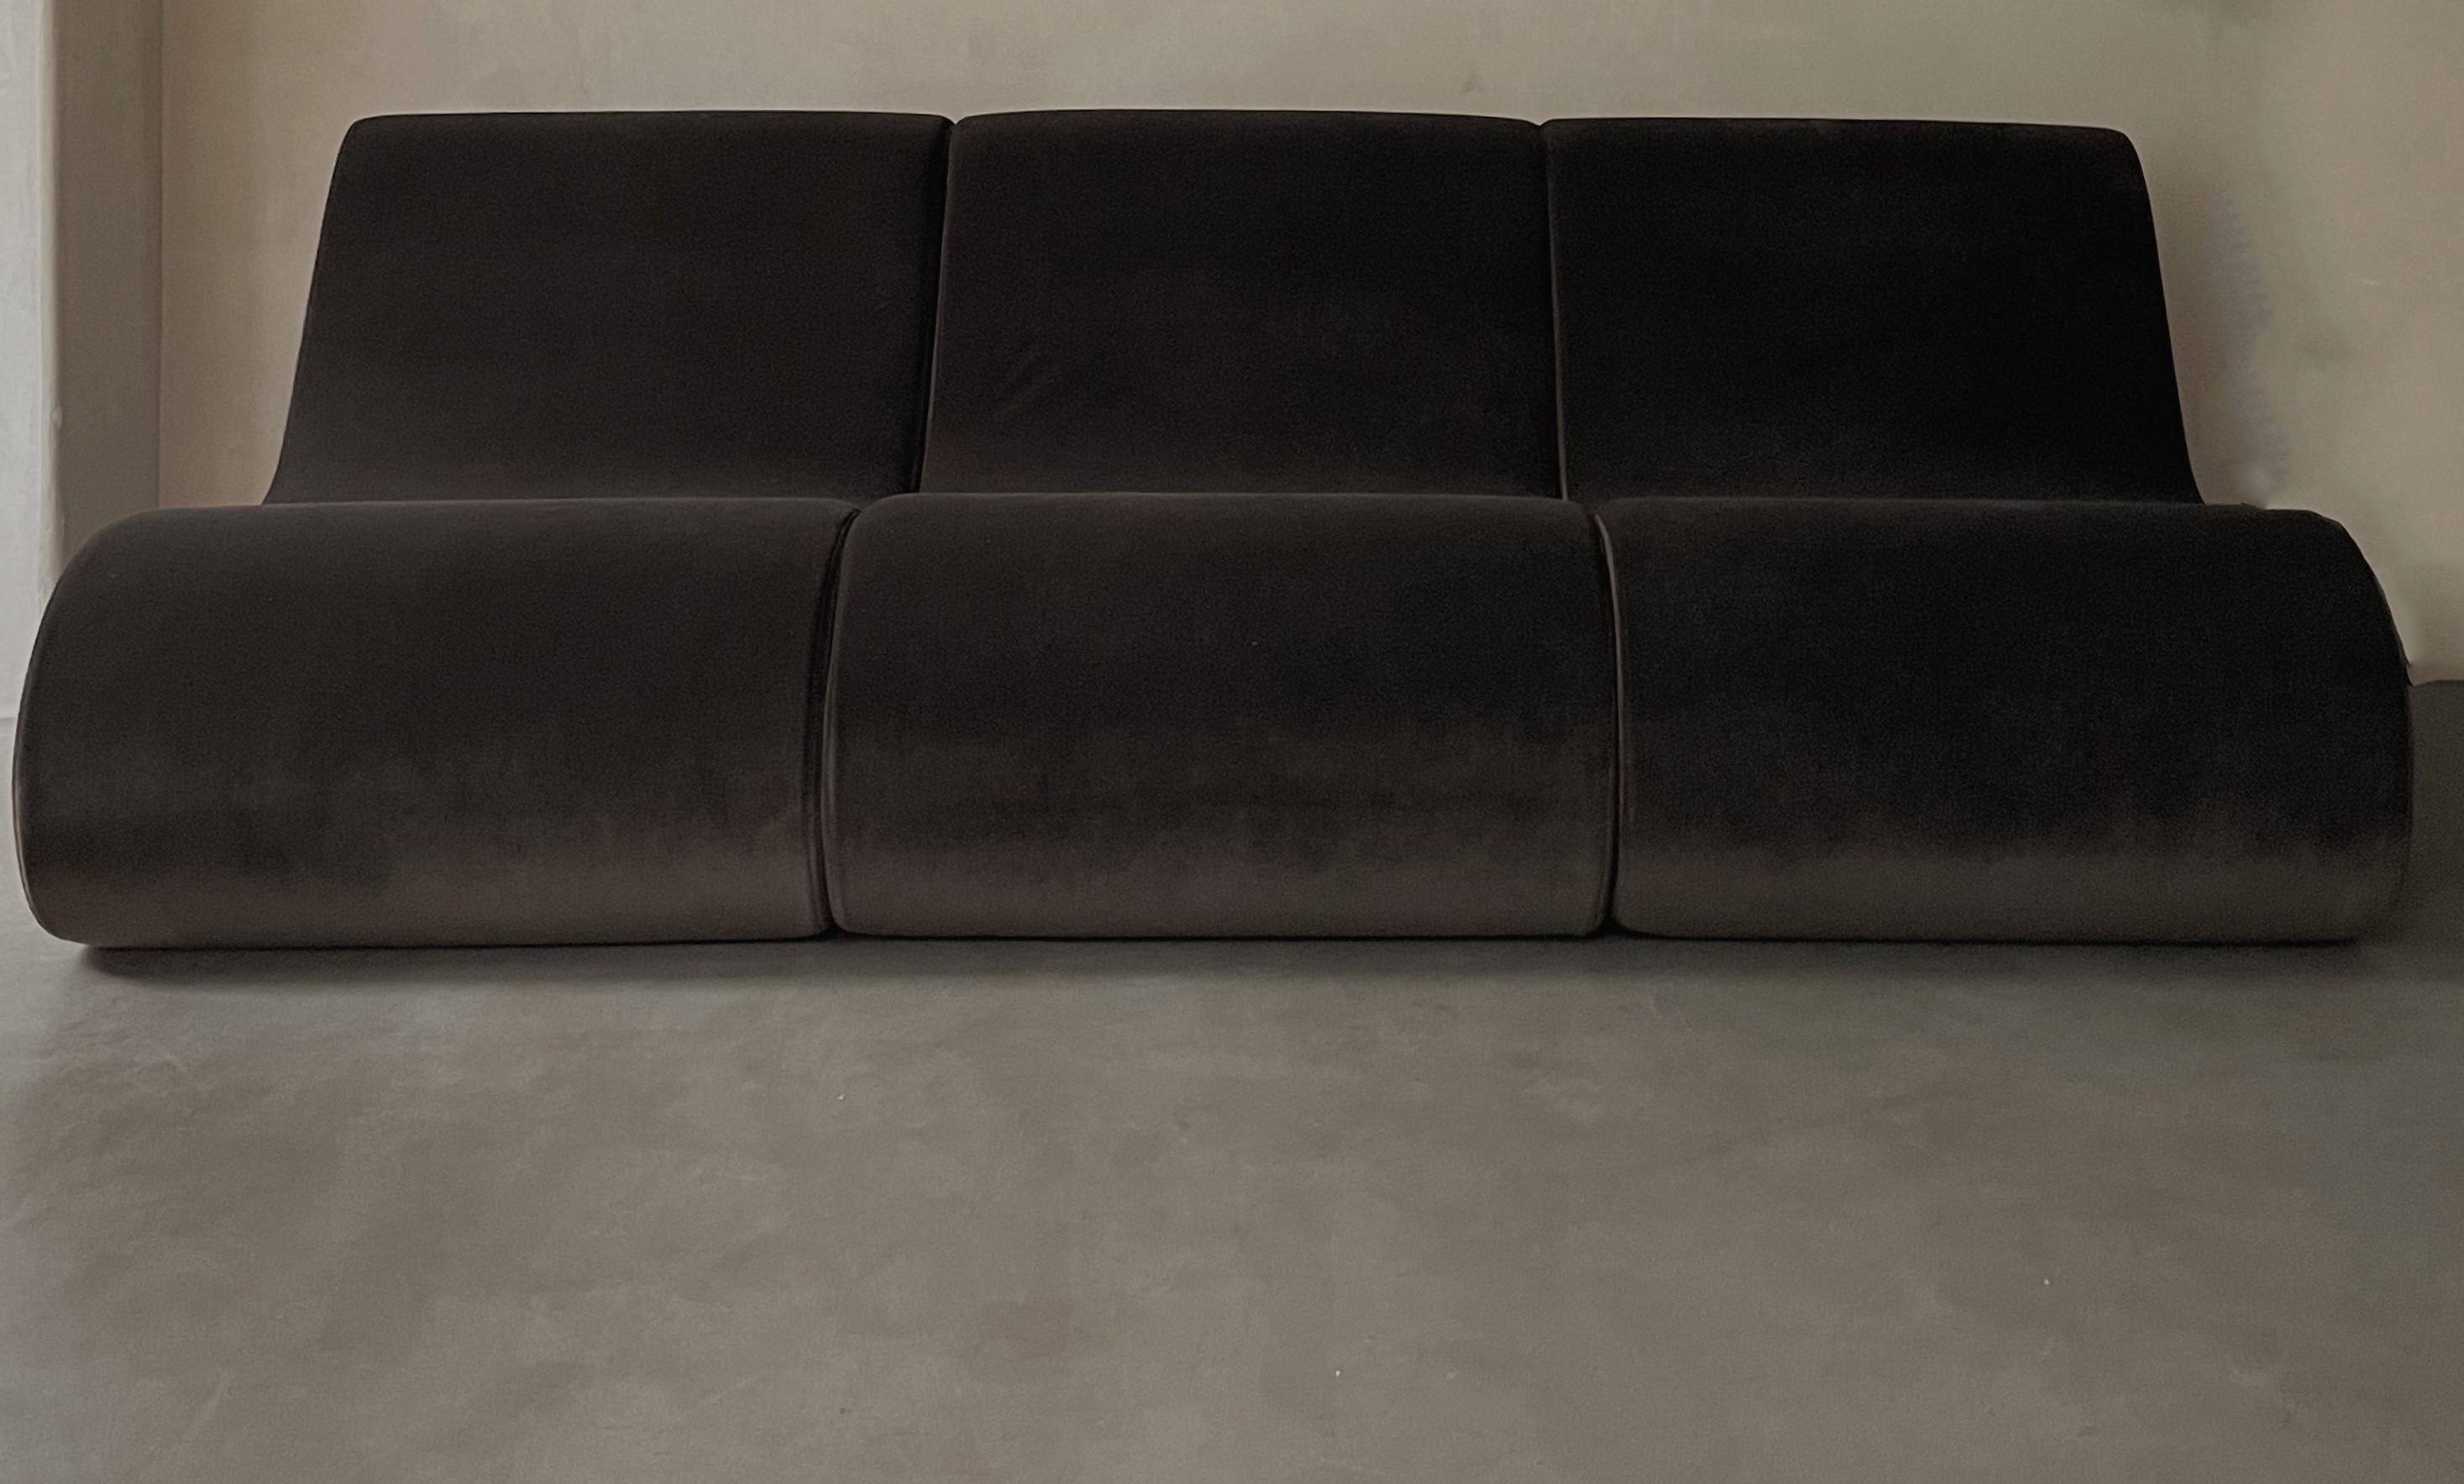 Modular sofa by Karstudio
Dimensions: W 210 x D 105 x H 70 cm
Materials: Fabric, MDF Frame


Kar, is the root of Sanskrit Karma, meaning karmic repetition. We seek the cause and effect in aesthetics, inspired from the past, the present, and the